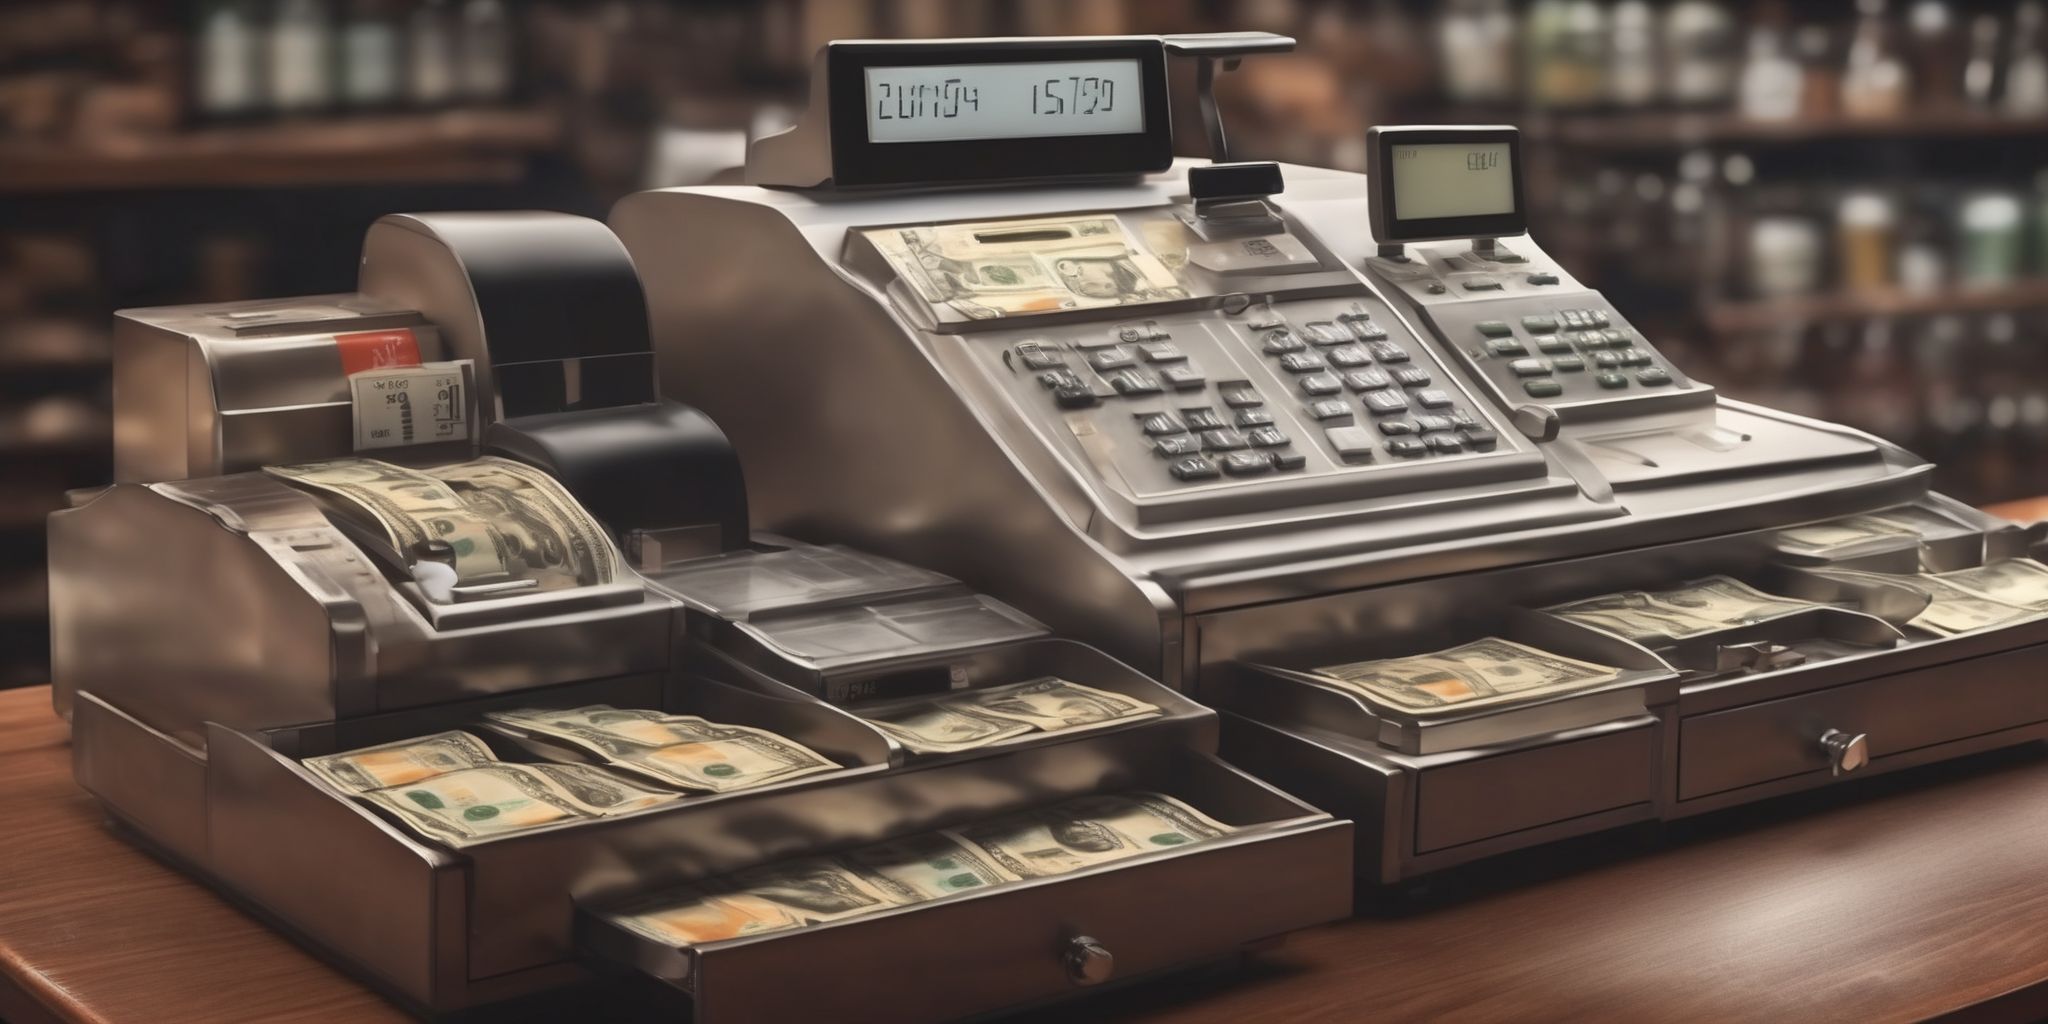 Cash register  in realistic, photographic style